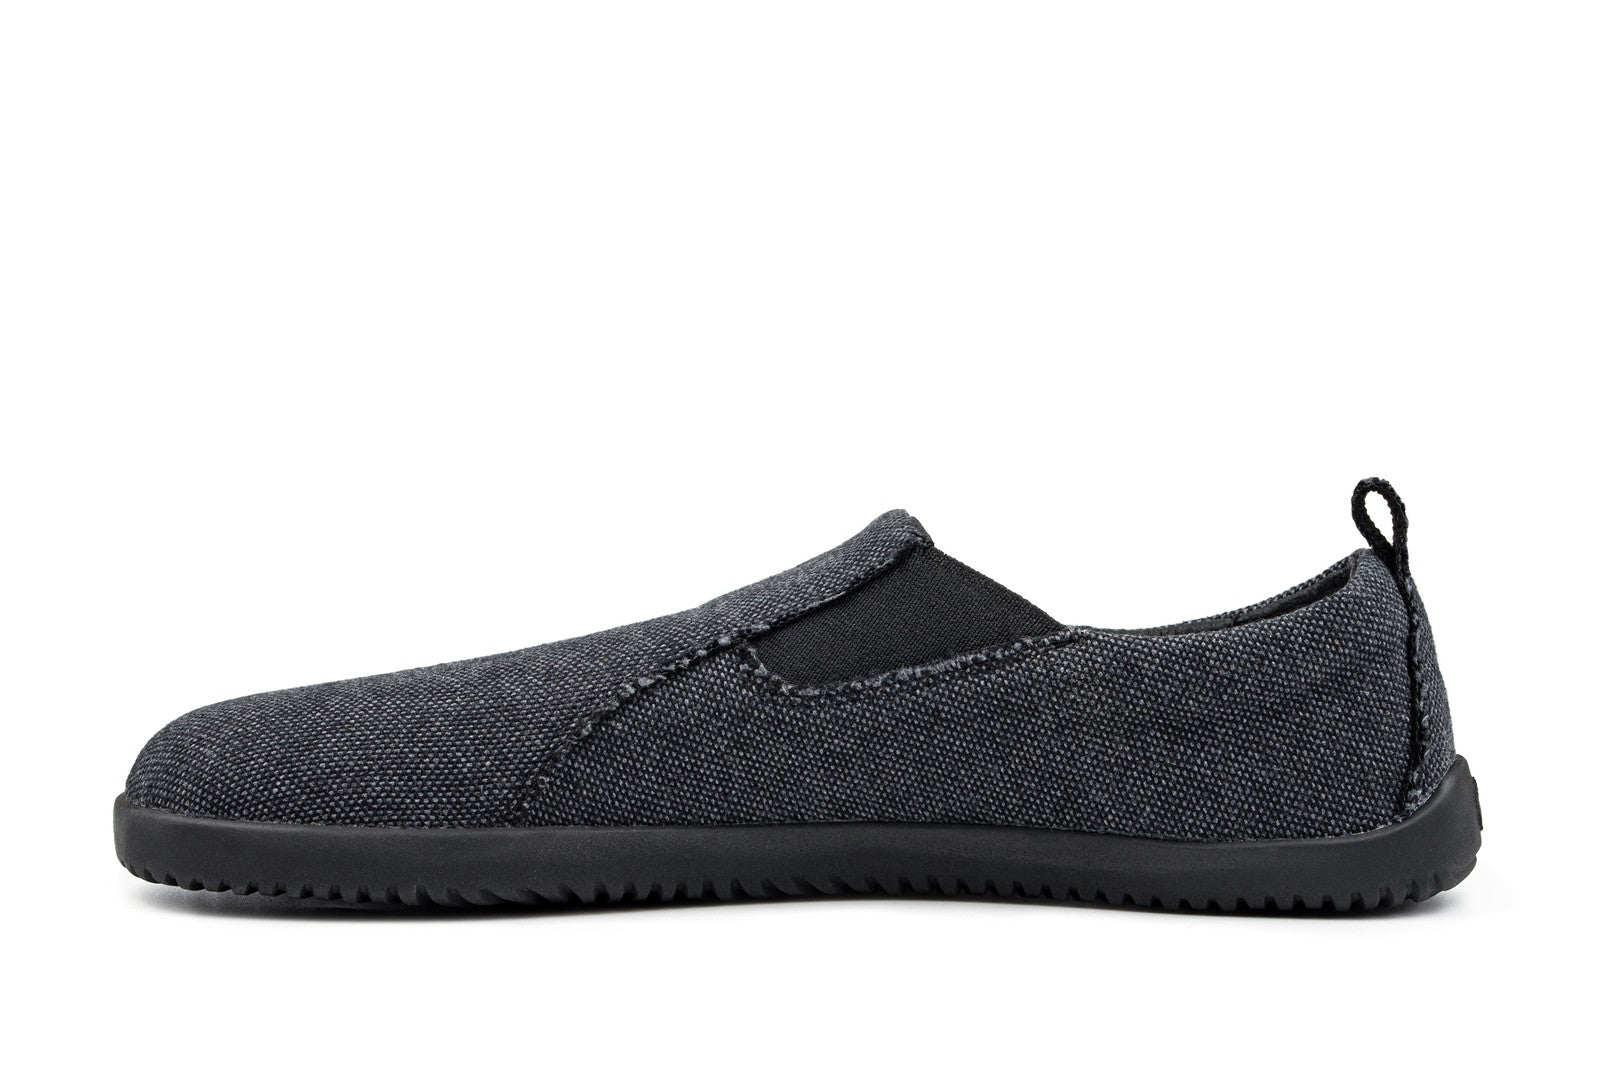 Men's recycled slip-on sneakers barefoot - IN STOCK | Ahinsa shoes 👣